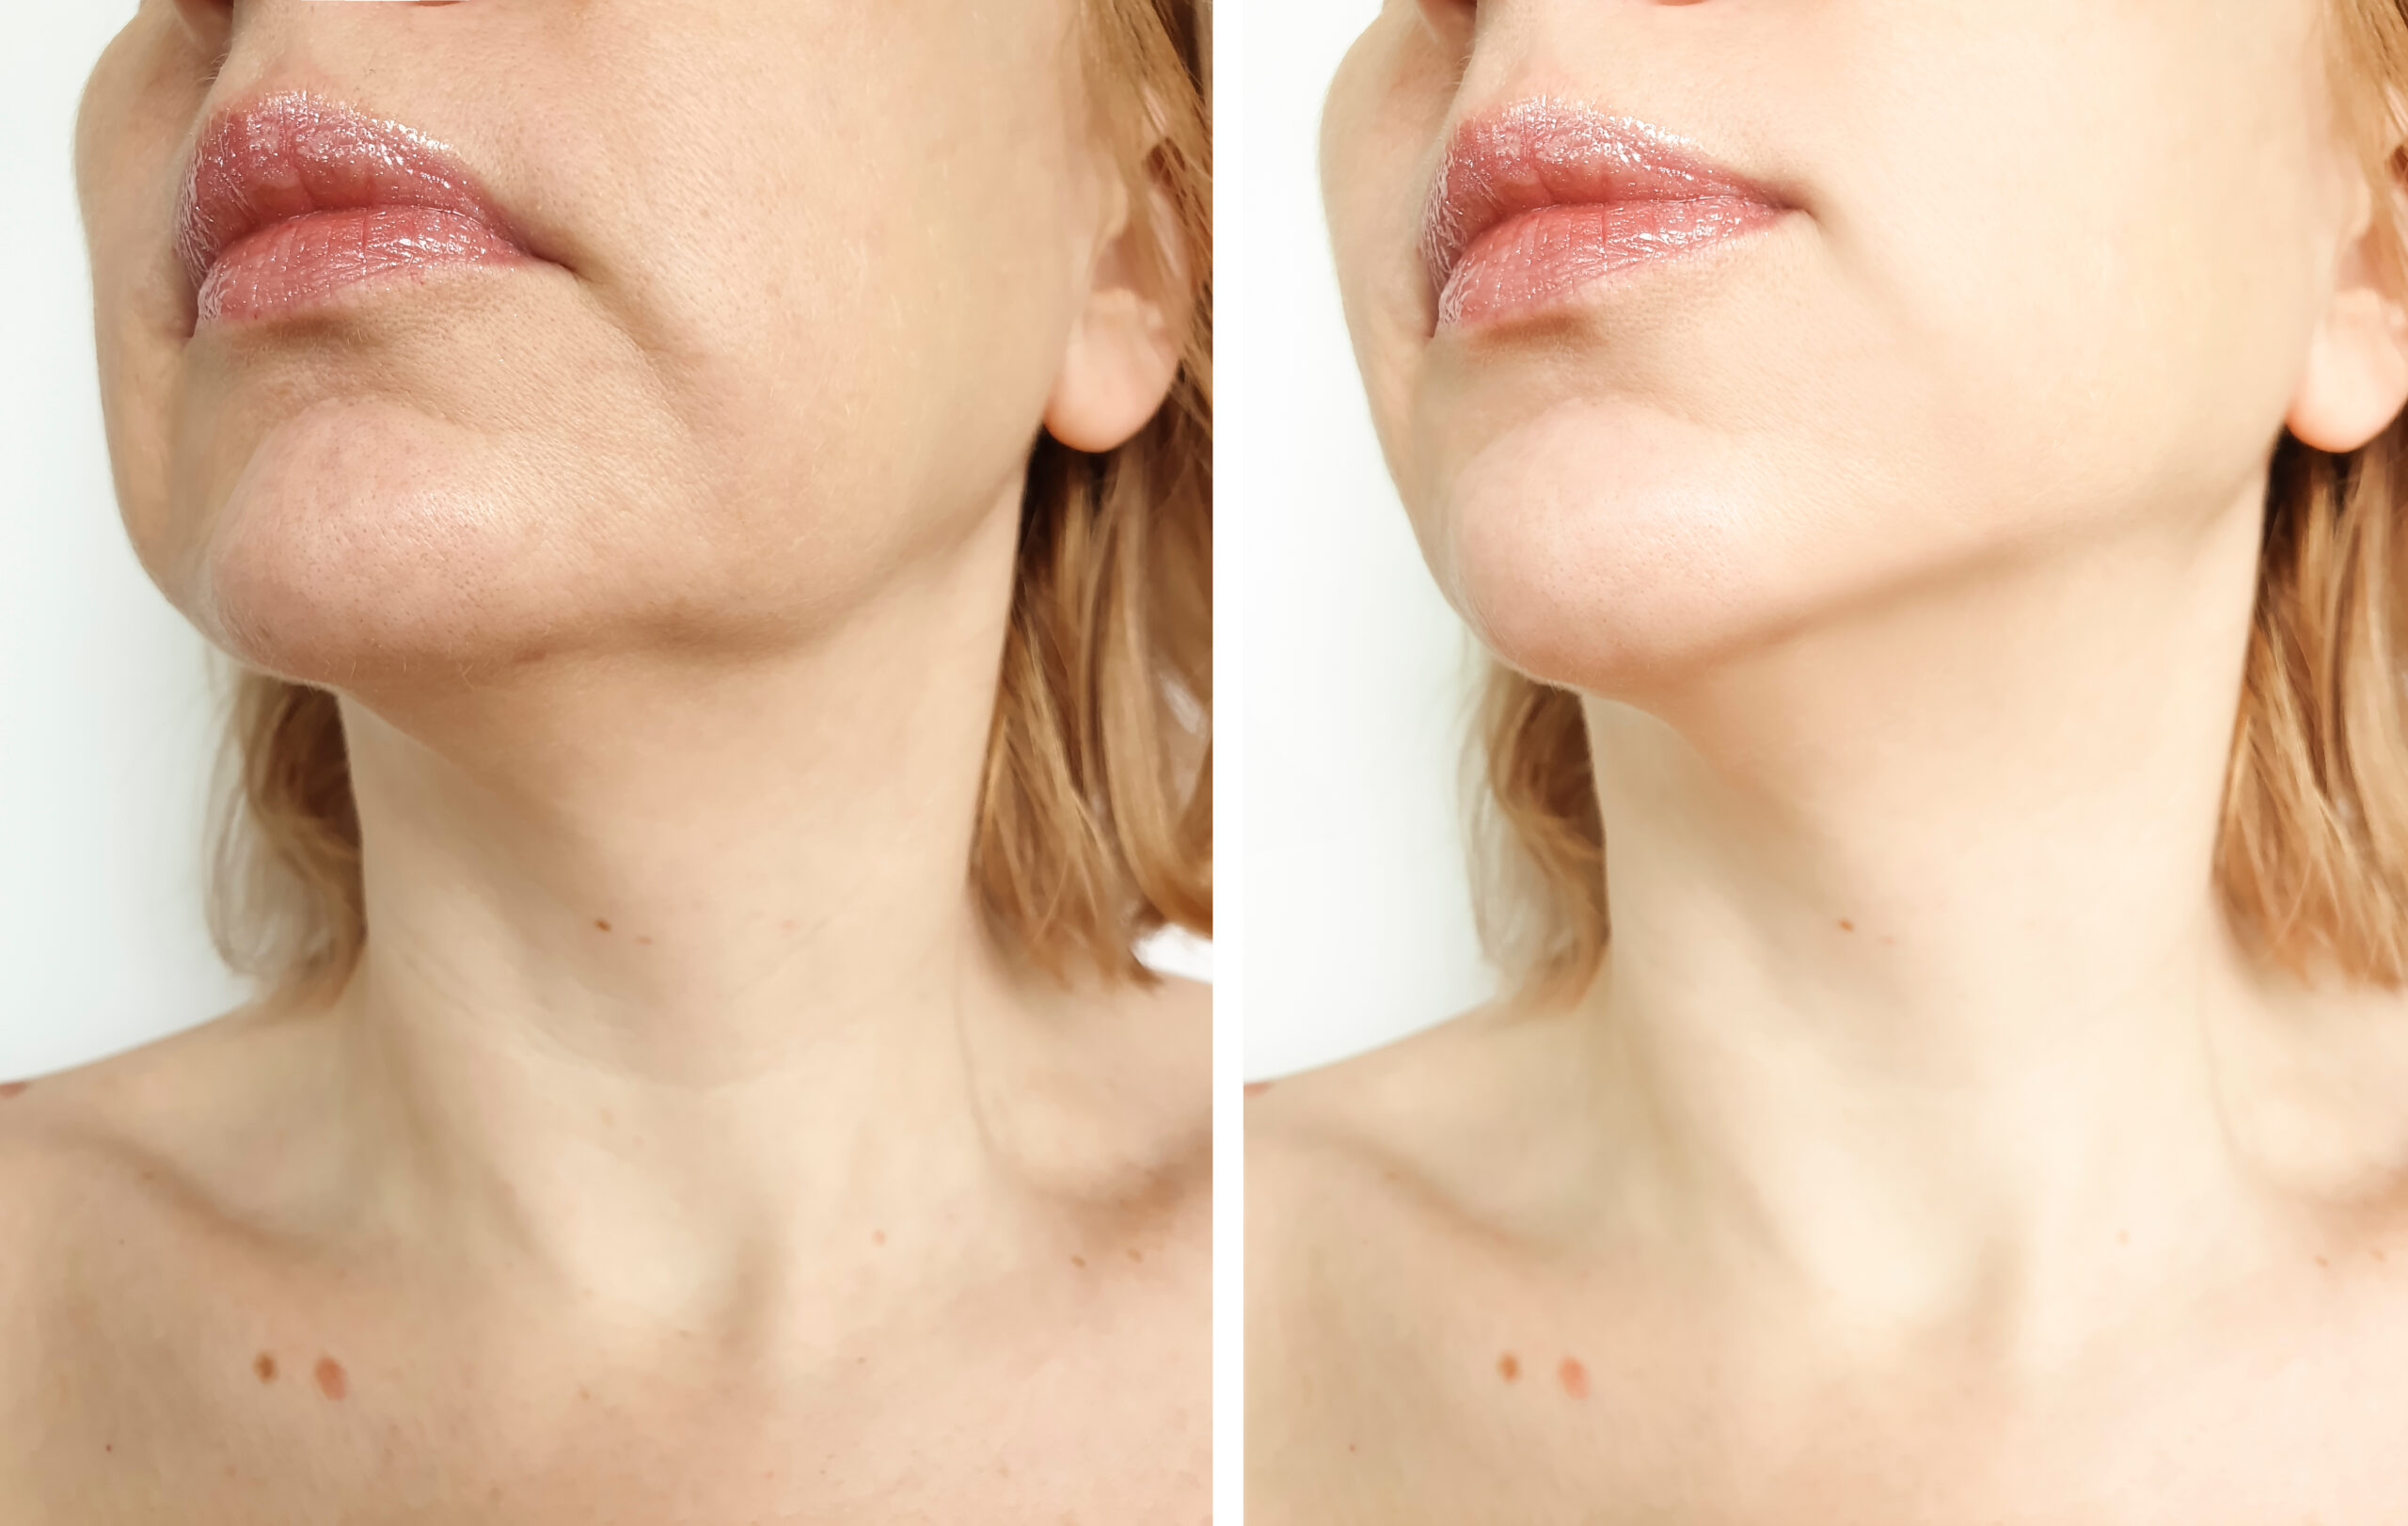 Woman,Tightening,The,Chin,Before,And,After,The,Procedure